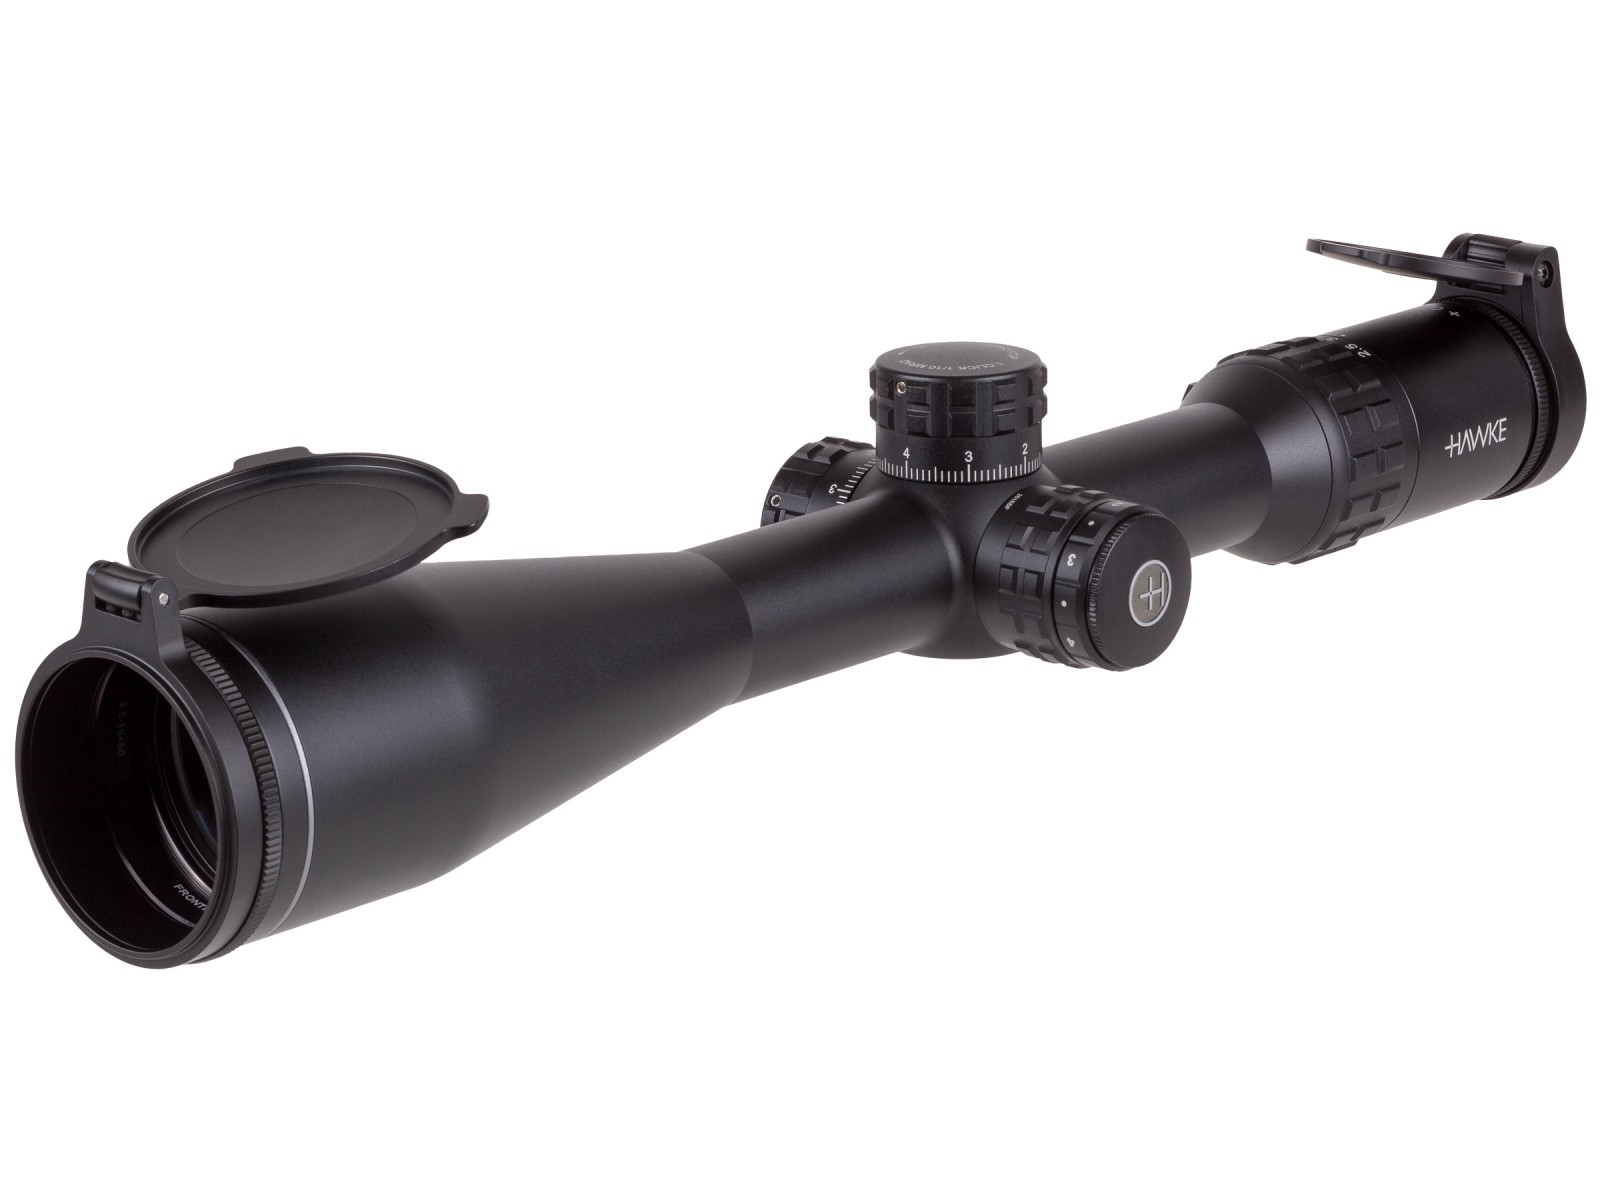 Image of Hawke Frontier 30 SF 25-15x50 AO Rifle Scope MIL PRO Reticle 1/10 MRAD 30mm Tube ID 5054492184217